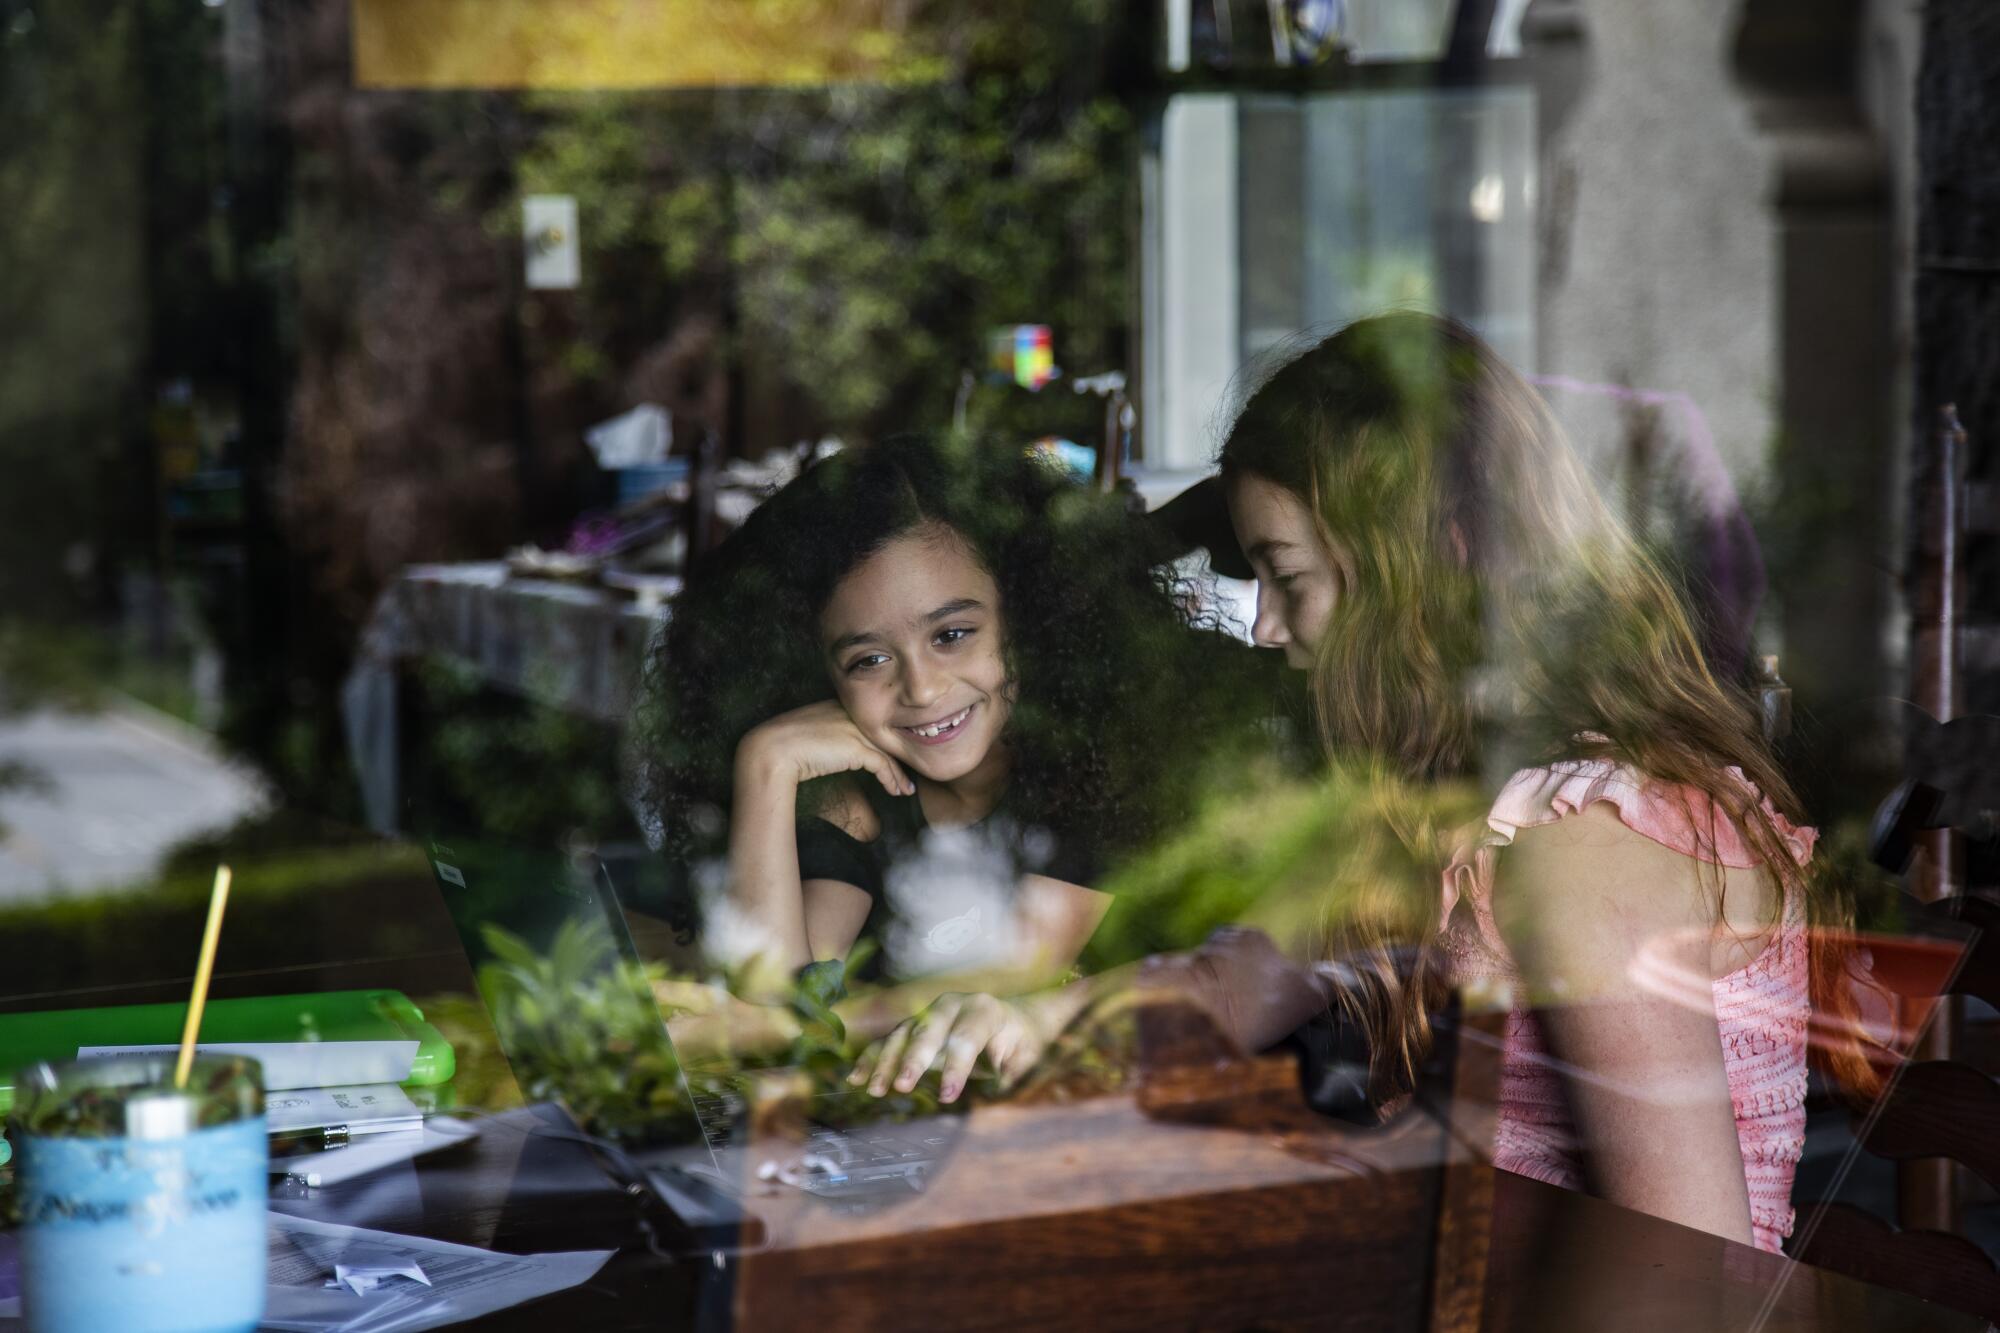 Allison Furbush, left, and Ellie Bristow are seen through a front porch window while teaming up on a science project.